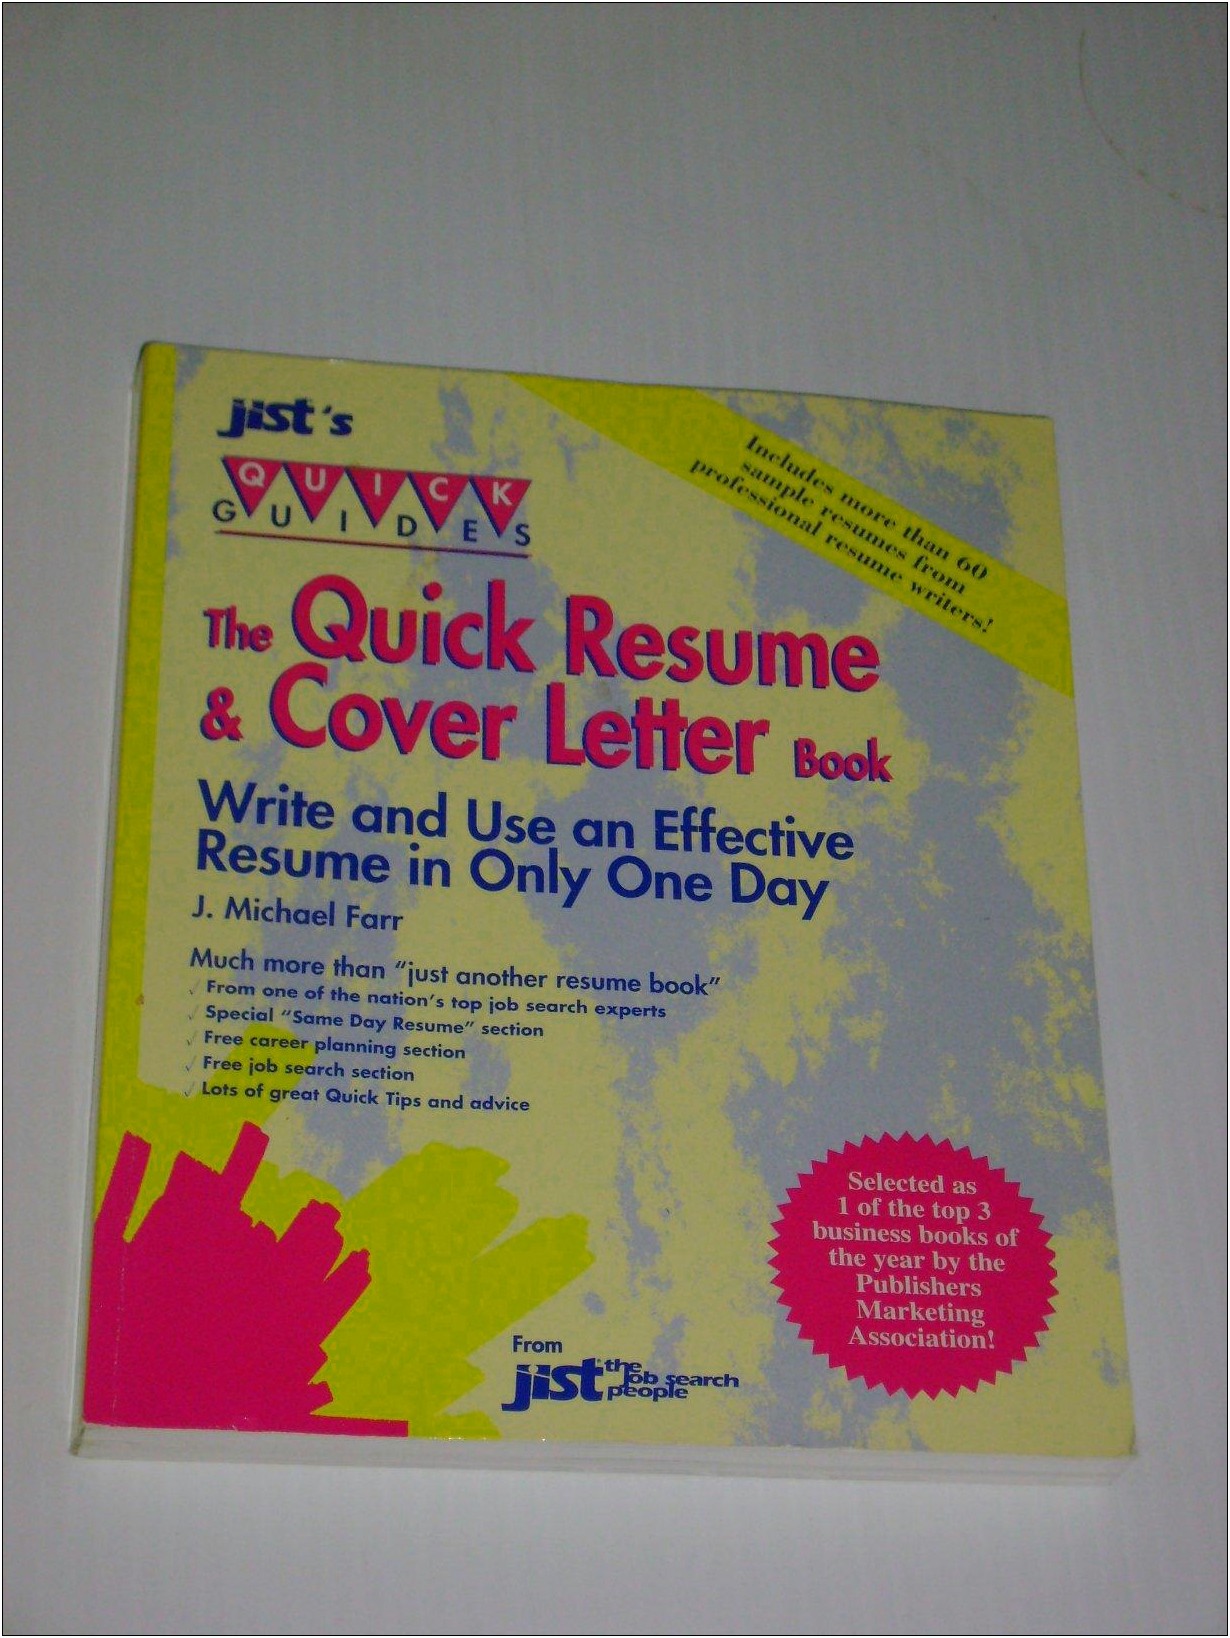 Best Way To Write A Quick Resume